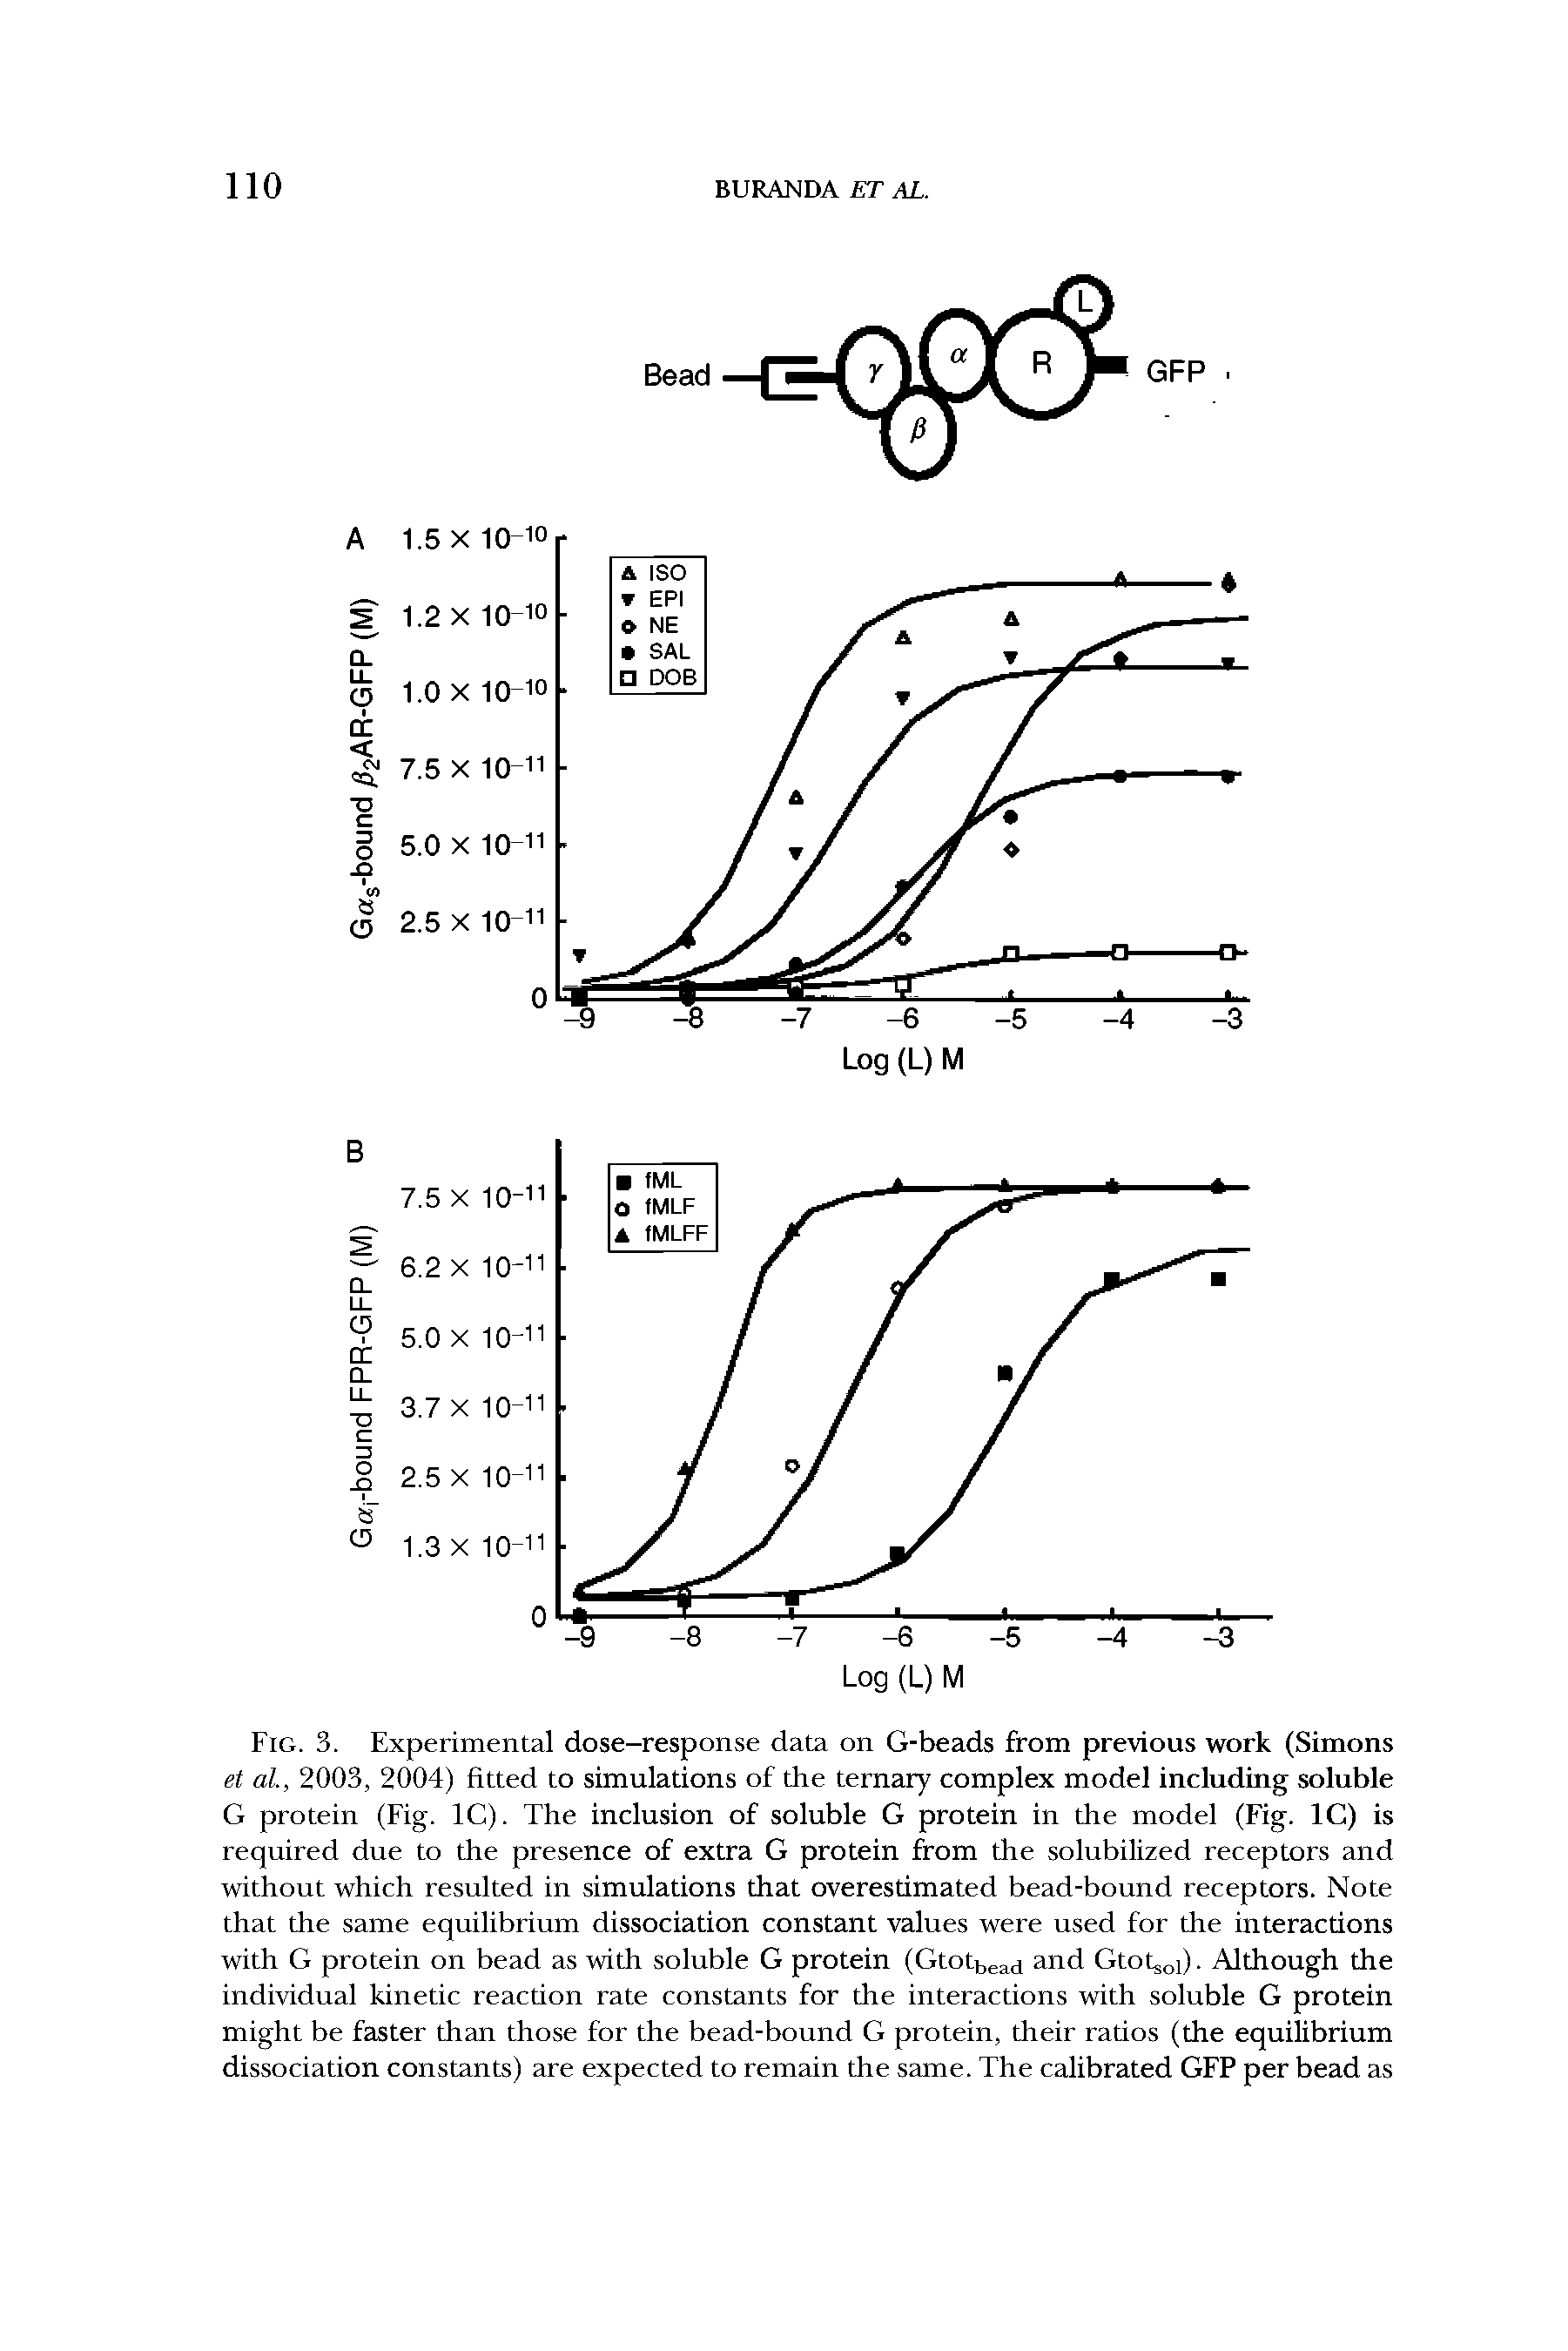 Fig. 3. Experimental dose-response data on G-beads from previous work (Simons et al, 2003, 2004) fitted to simulations of the ternary complex model including soluble G protein (Fig. 1C). The inclusion of soluble G protein in the model (Fig. 1C) is required due to the presence of extra G protein from the solubilized receptors and without which resulted in simulations that overestimated bead-bound receptors. Note that the same equilibrium dissociation constant values were used for the interactions with G protein on bead as with soluble G protein (Gtotbead and Gtots0l). Although the individual kinetic reaction rate constants for the interactions with soluble G protein might be faster than those for the bead-bound G protein, their ratios (the equilibrium dissociation constants) are expected to remain the same. The calibrated GFP per bead as...